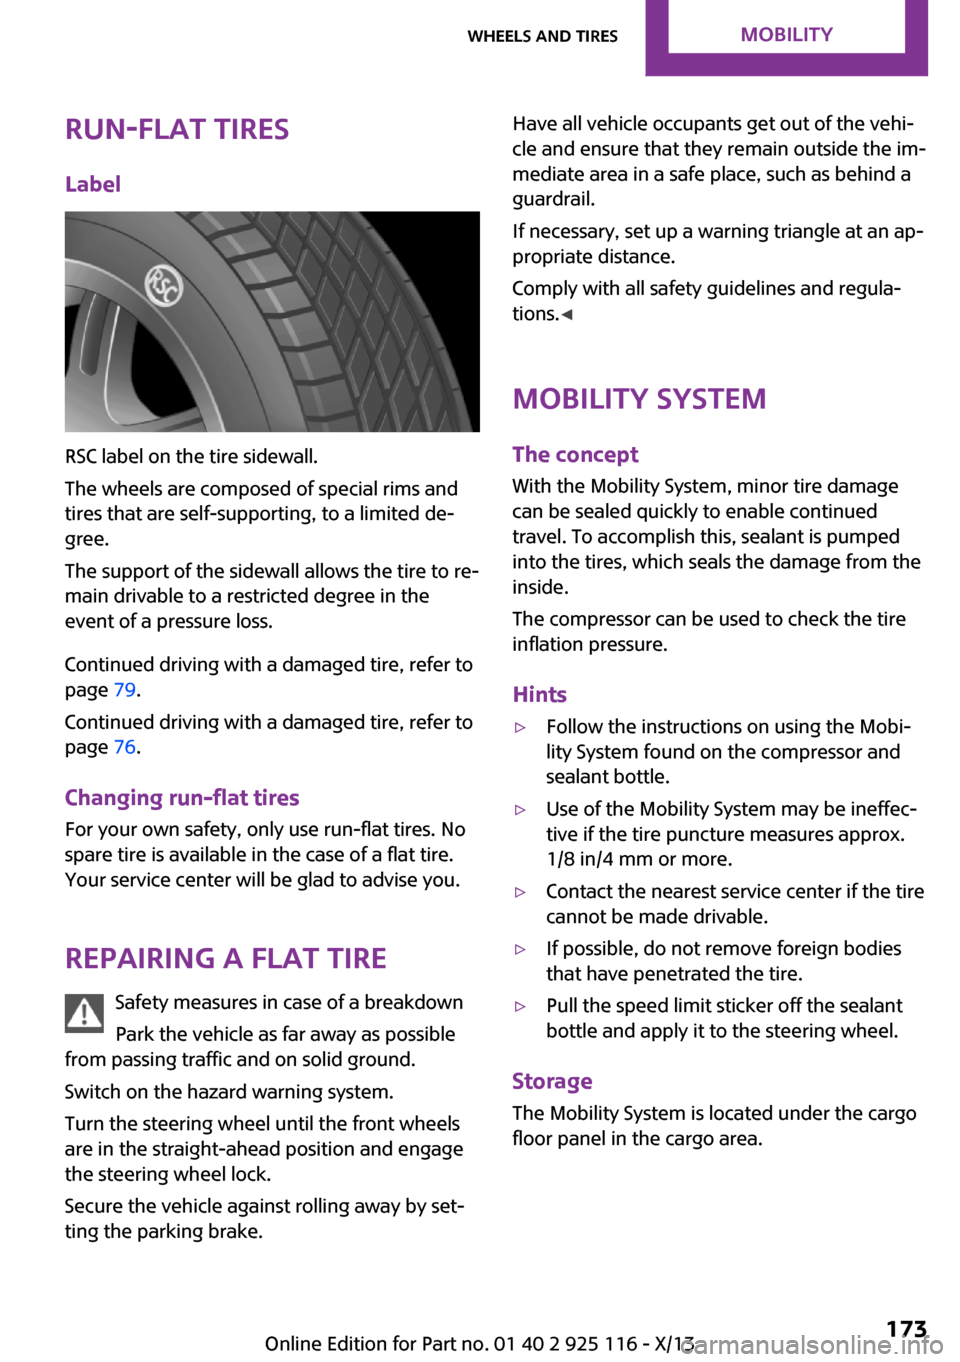 MINI 3 door 2013 User Guide Run-flat tiresLabel
RSC label on the tire sidewall.
The wheels are composed of special rims and
tires that are self-supporting, to a limited de‐
gree.
The support of the sidewall allows the tire to 